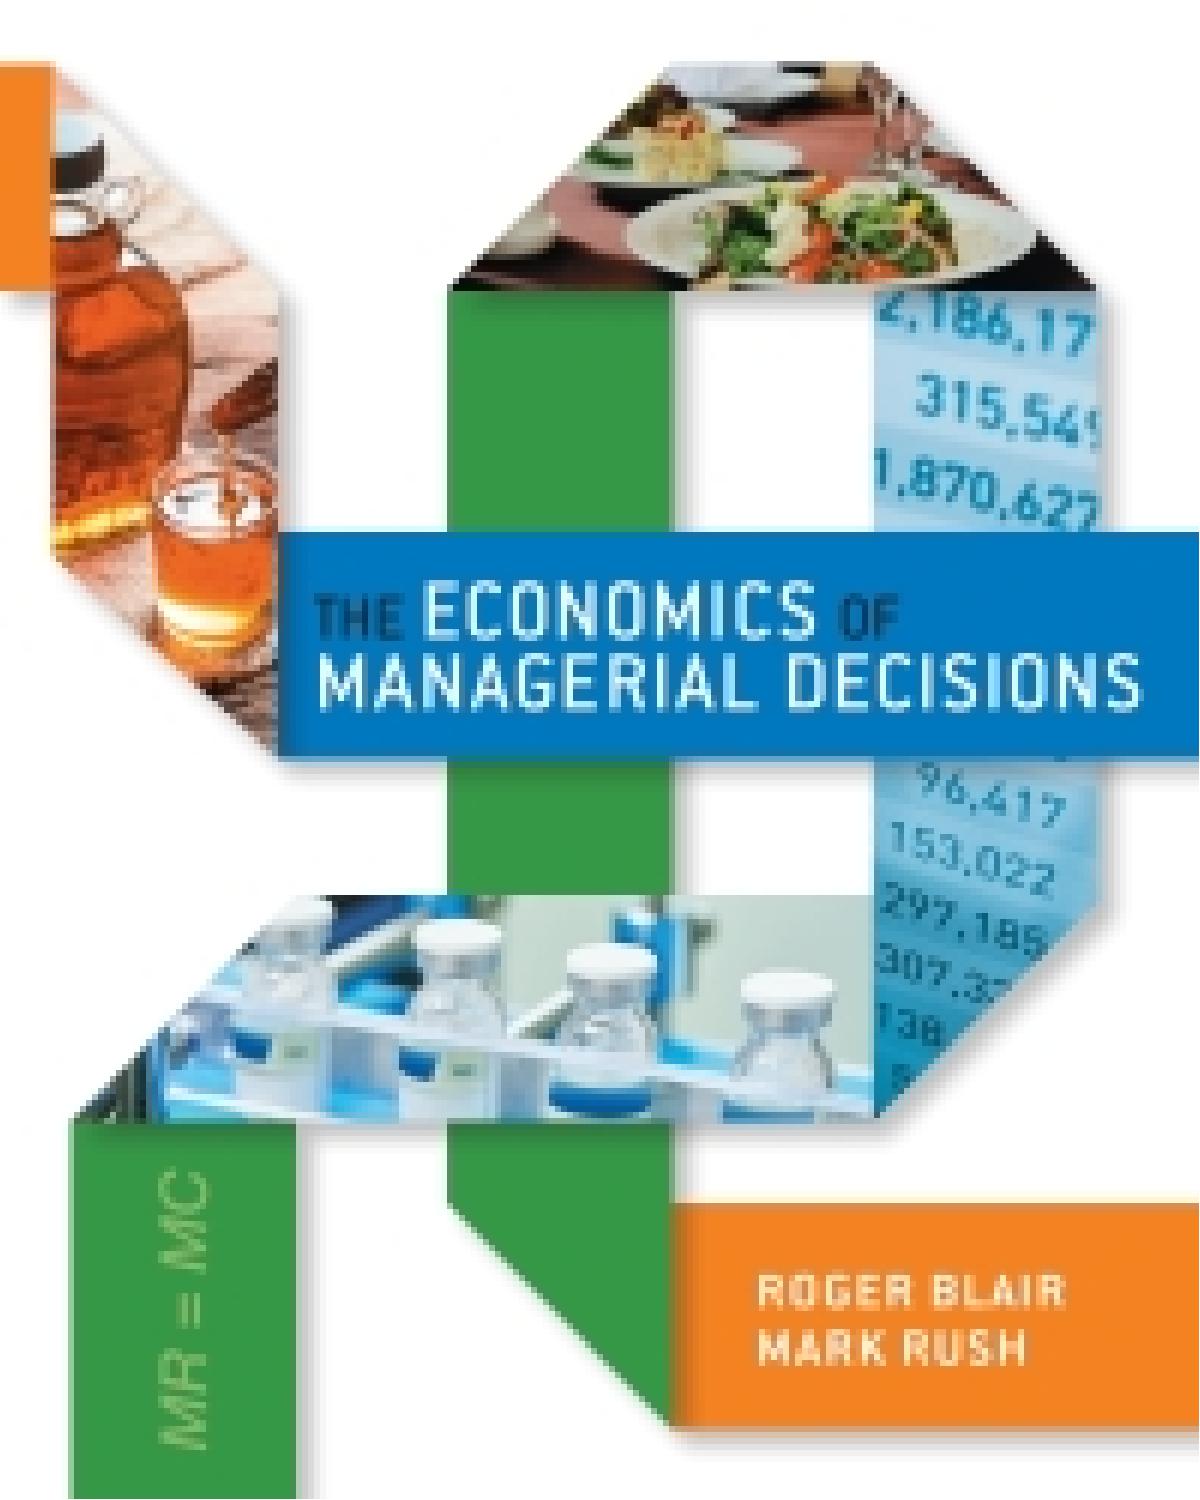 Economics of Managerial Decisions 1st Edition By Roger Blair, The - Wei Zhi.jpg